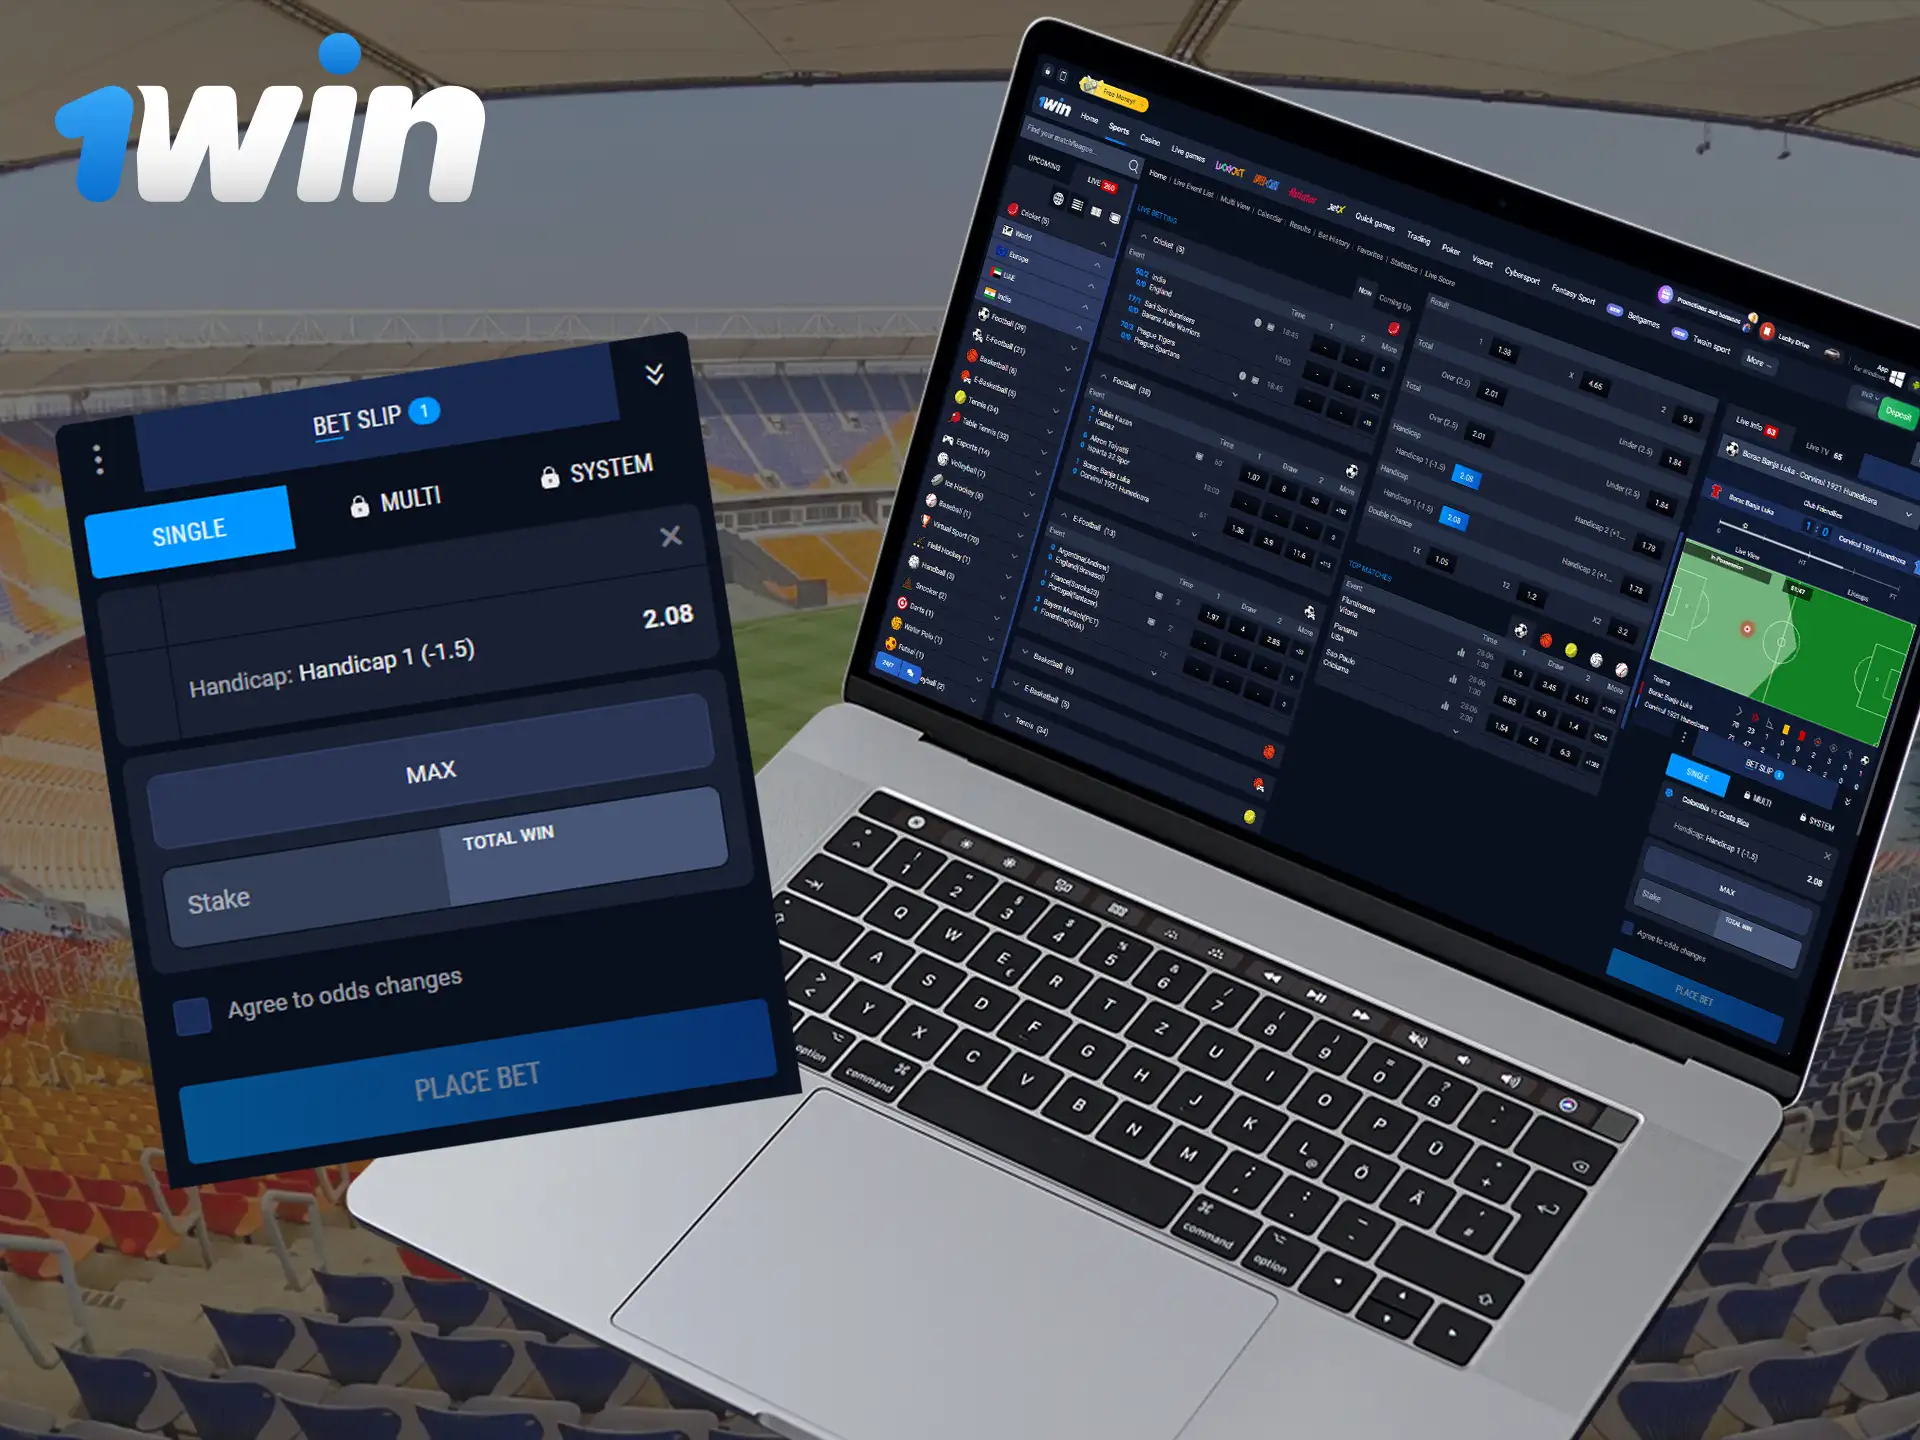 1Win offers sports betting with handicaps.